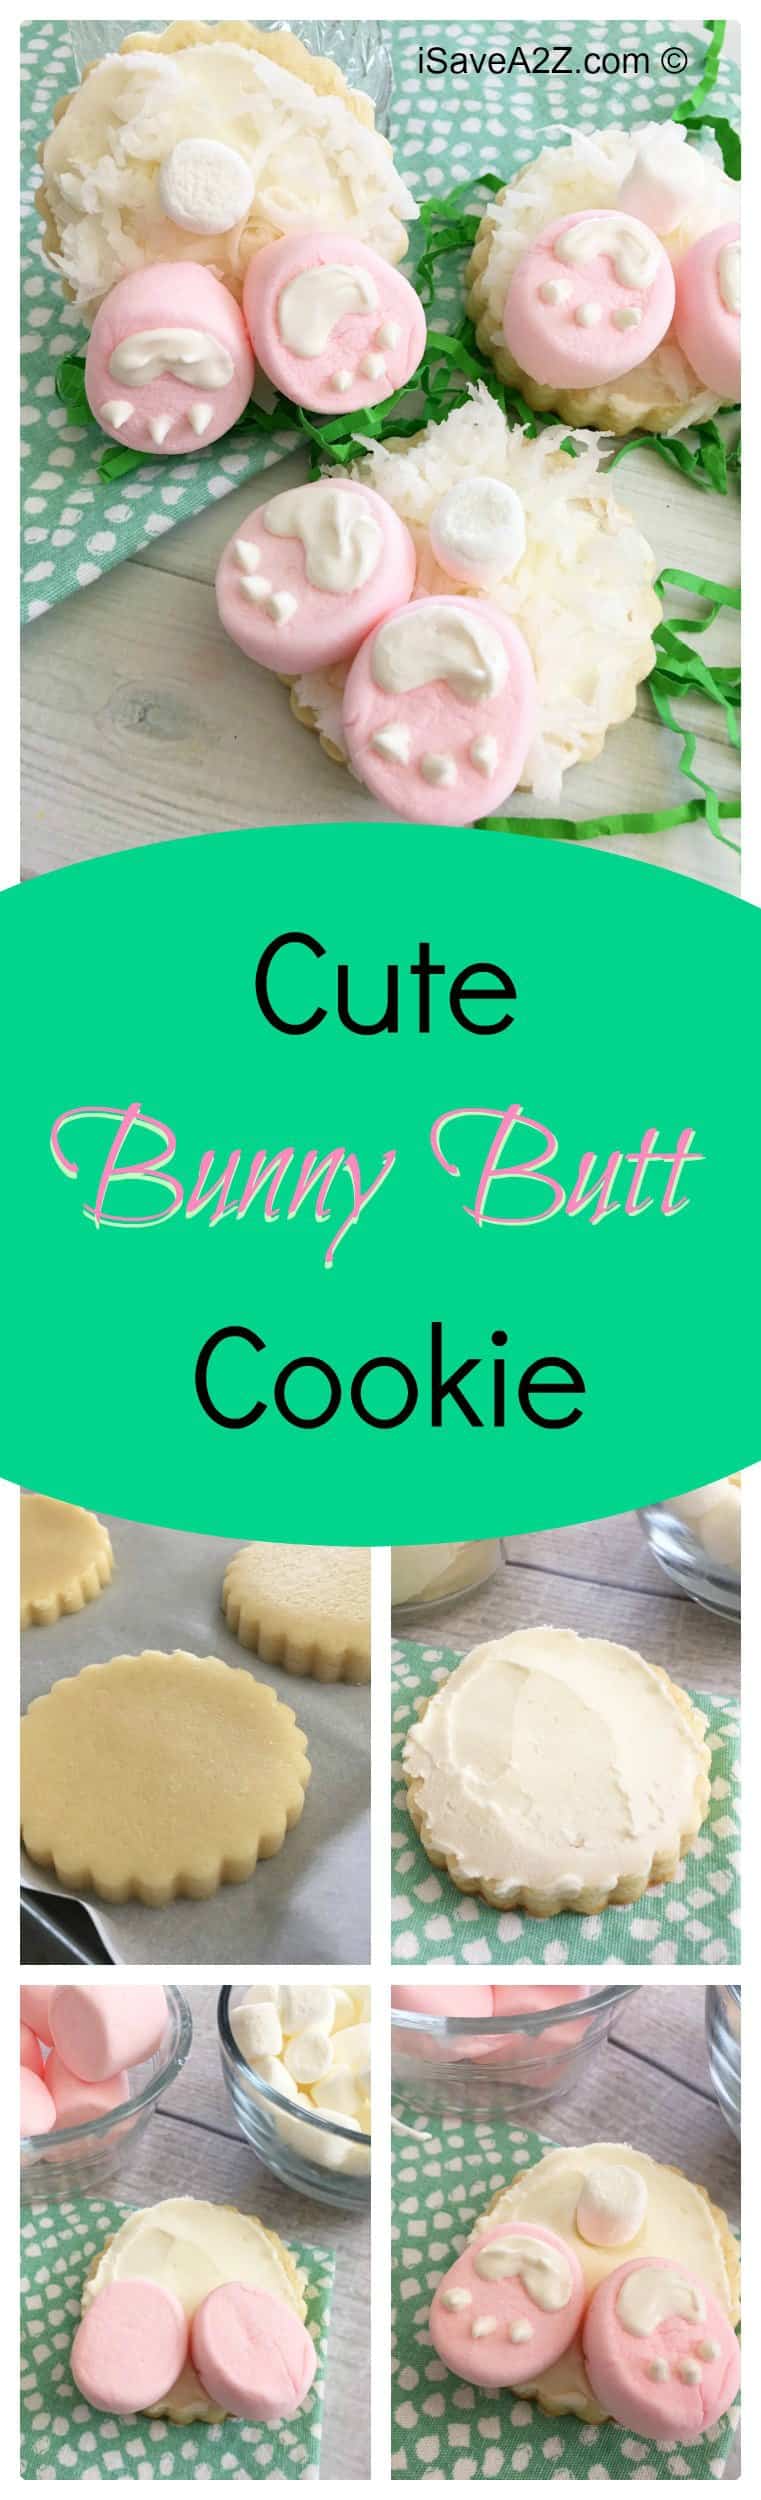 Easy Bunny Butt Cookie Recipe